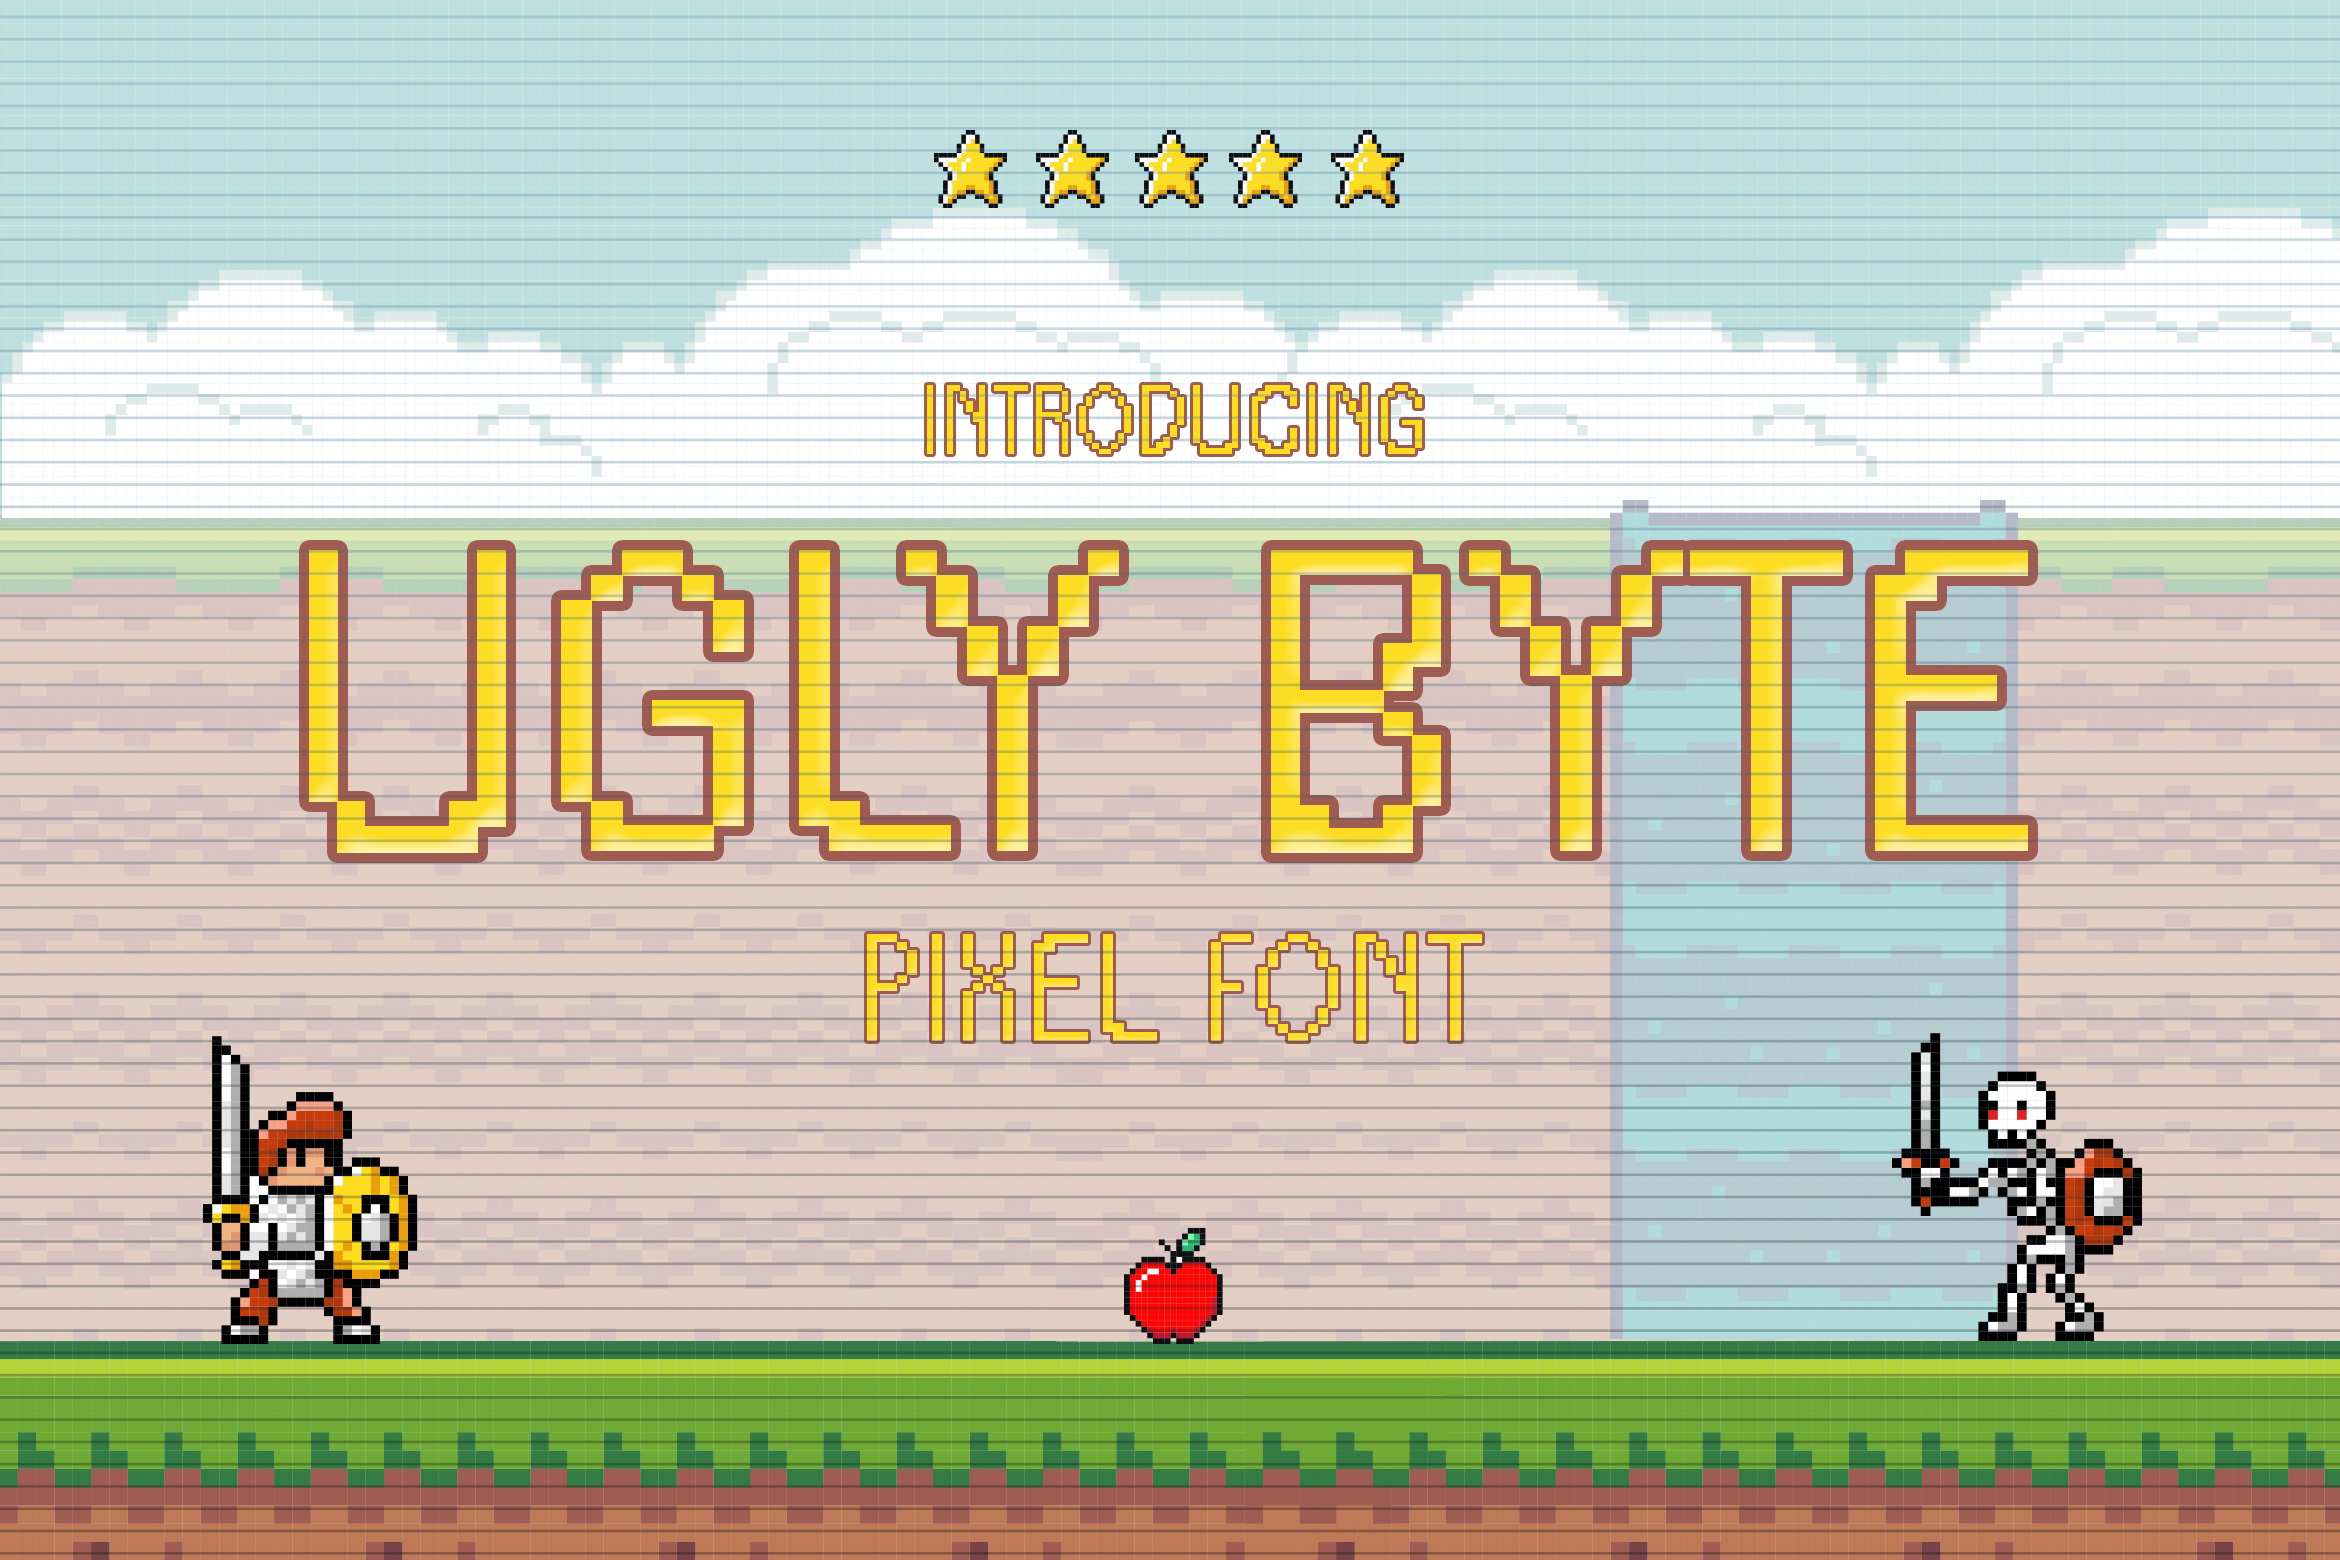 Ugly Byte Free Trial